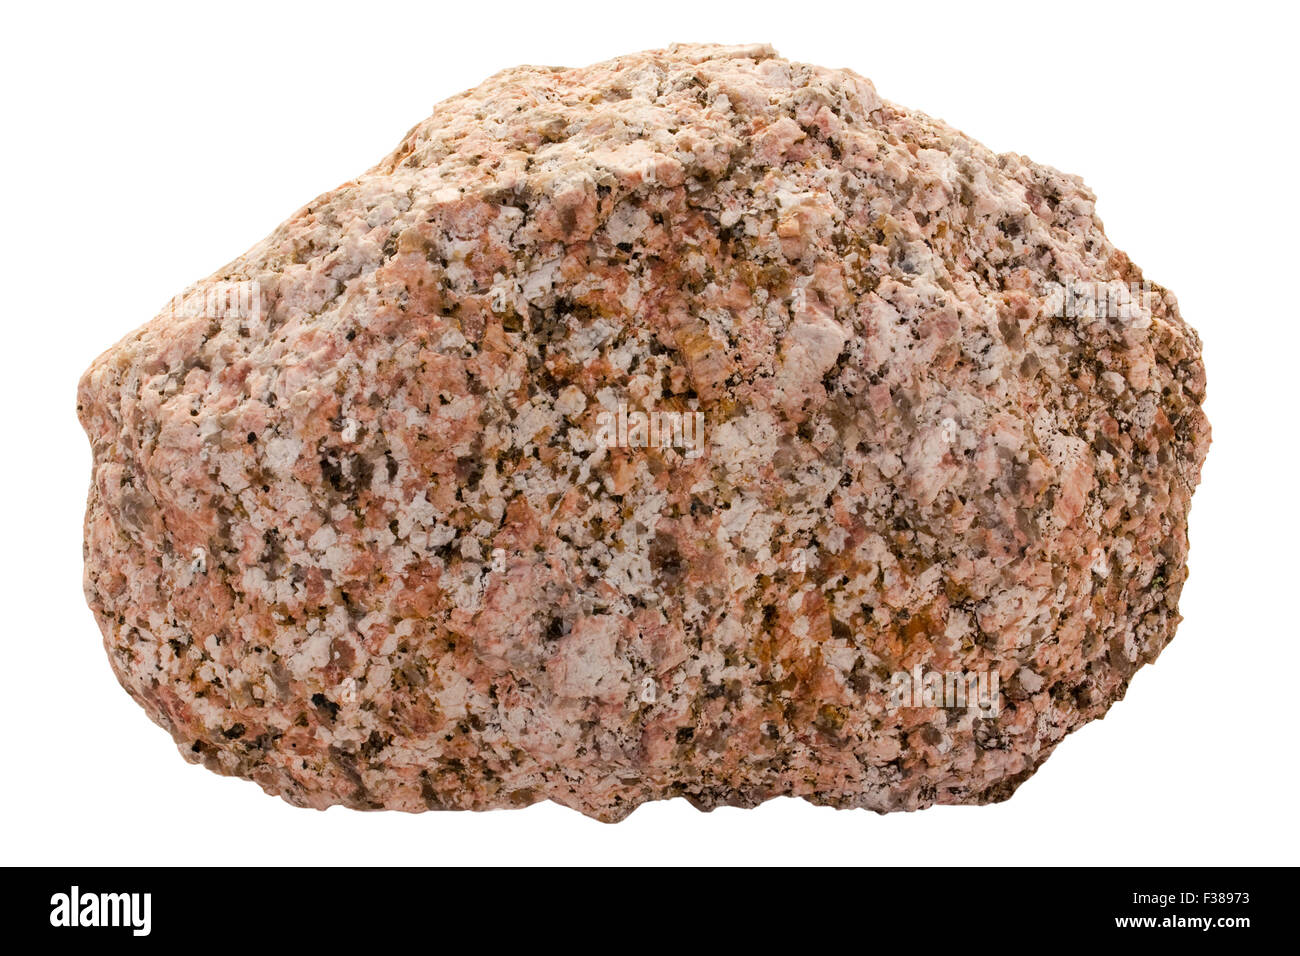 Monzogranite (roughly equal amount of alkali and plagioclase feldspar) Stock Photo